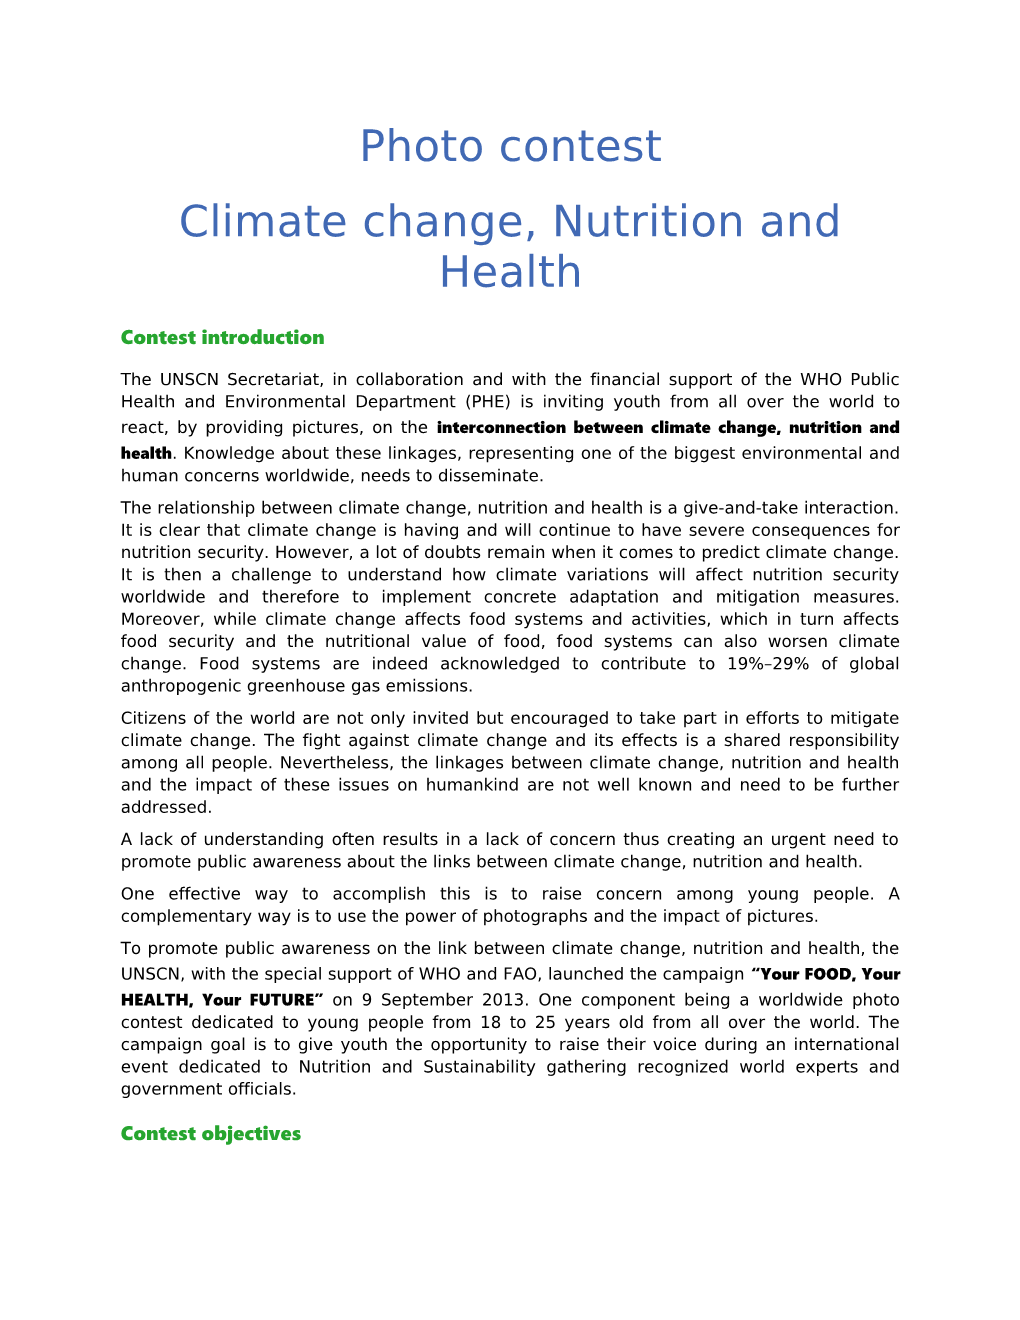 Climate Change, Nutrition and Health